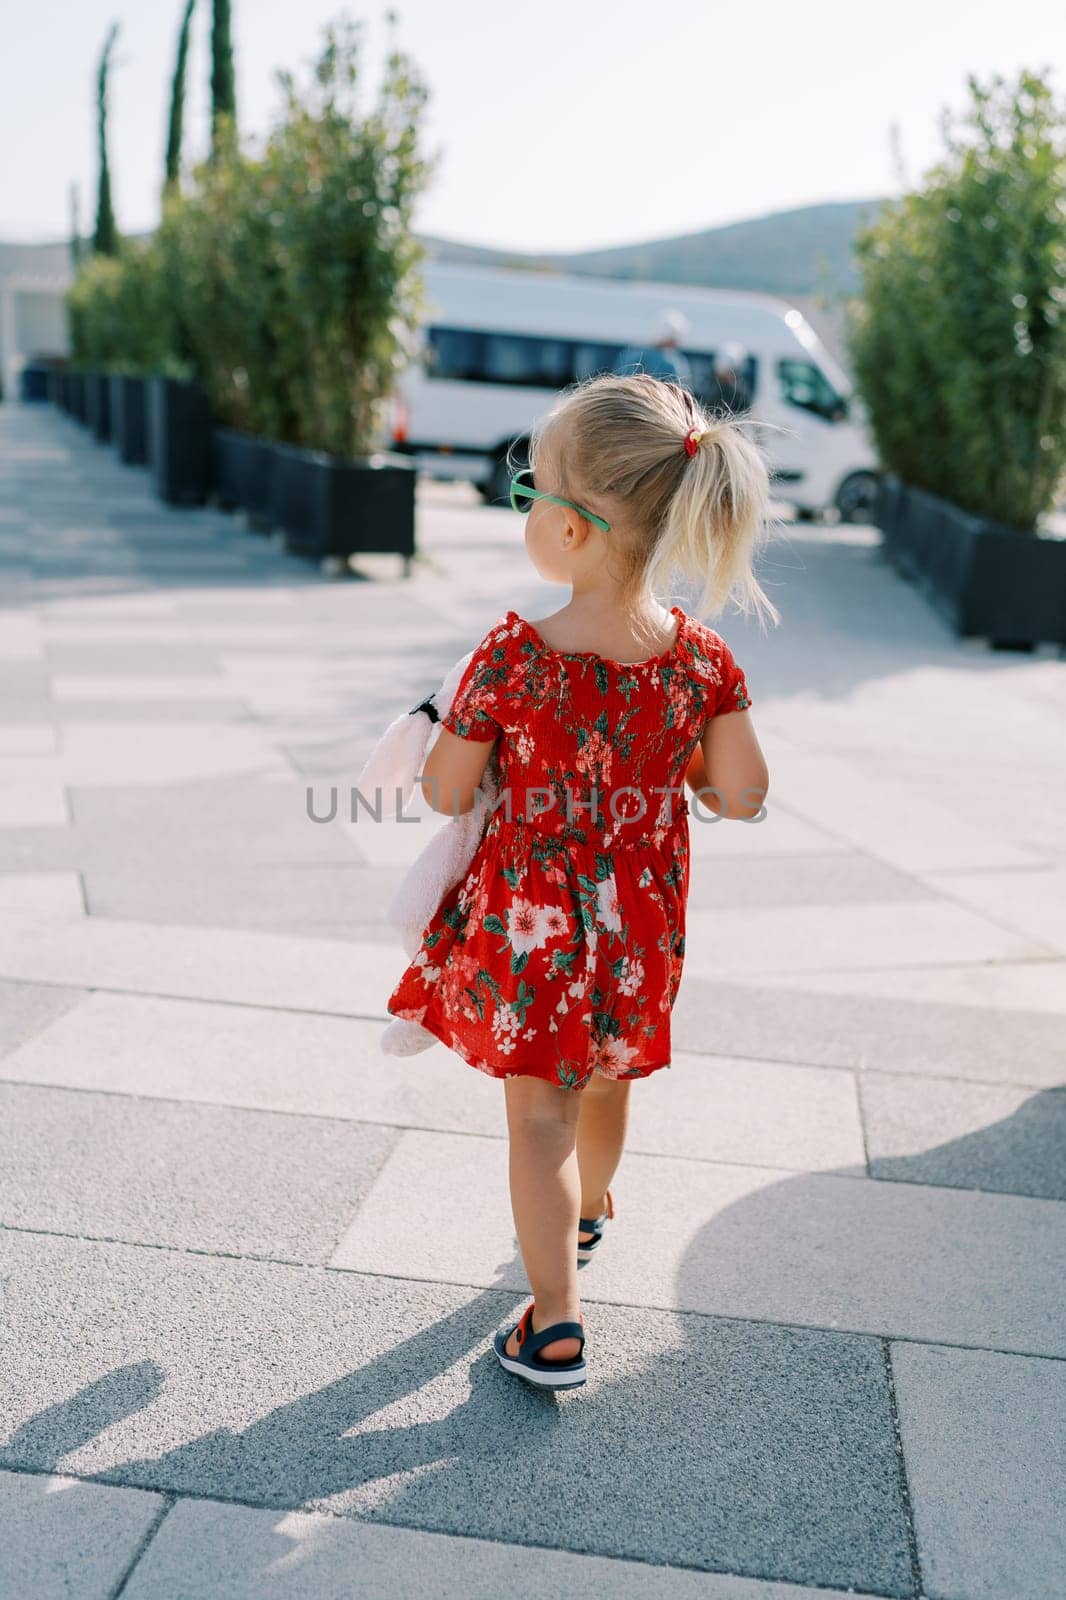 Little girl walks with a pink toy through a square with green trees in flowerpots and looks to the side. Back view. High quality photo